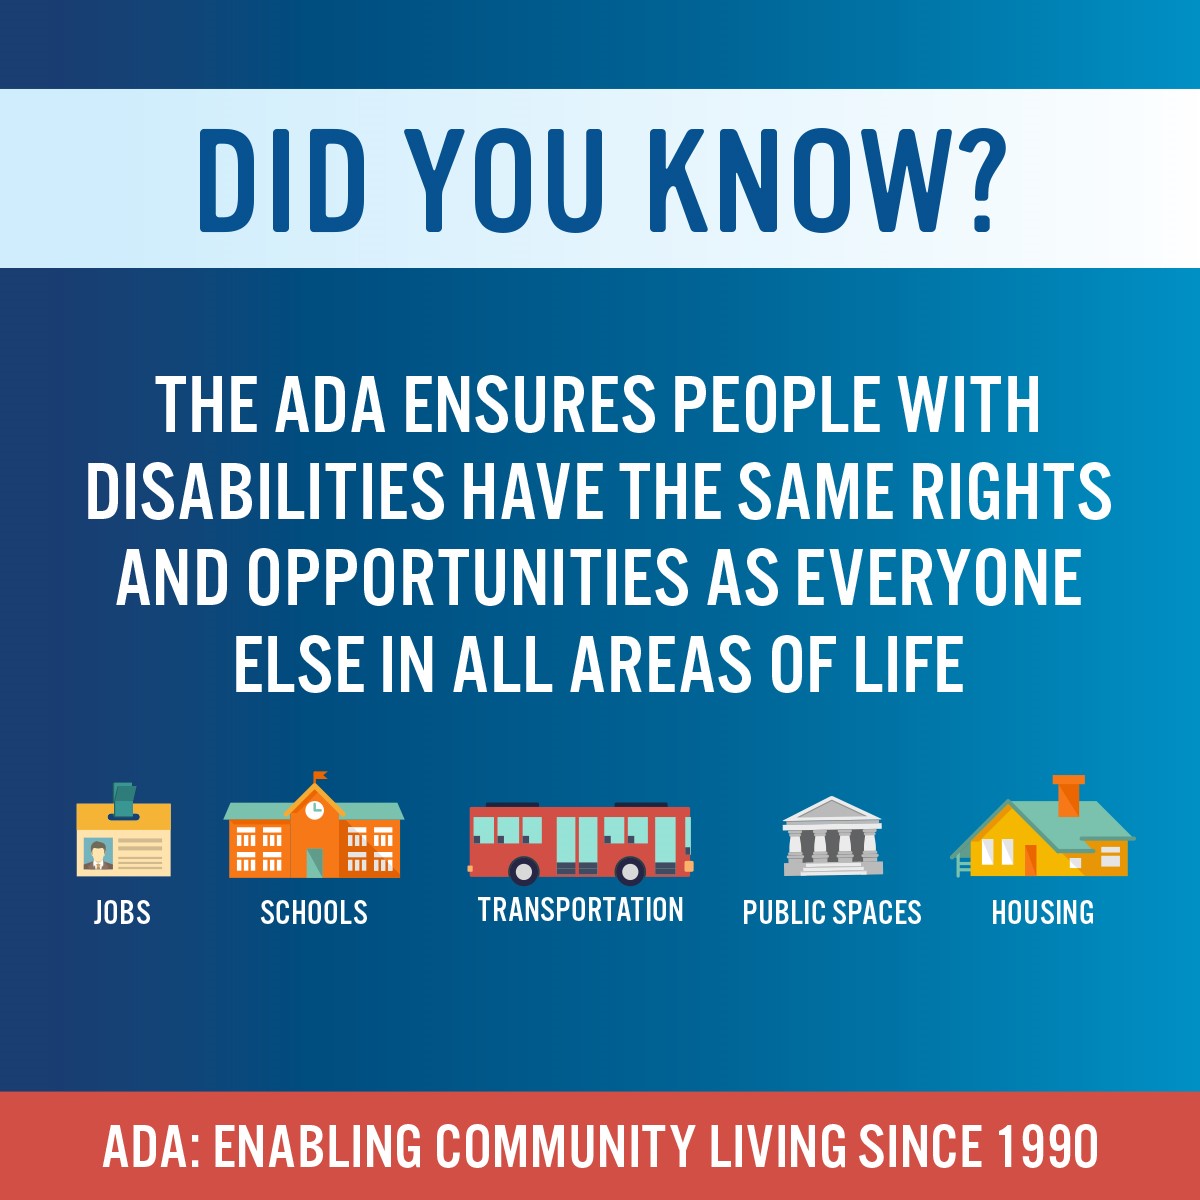 ADA ensures people with disabilities have the same rights and opportunities as everyone else